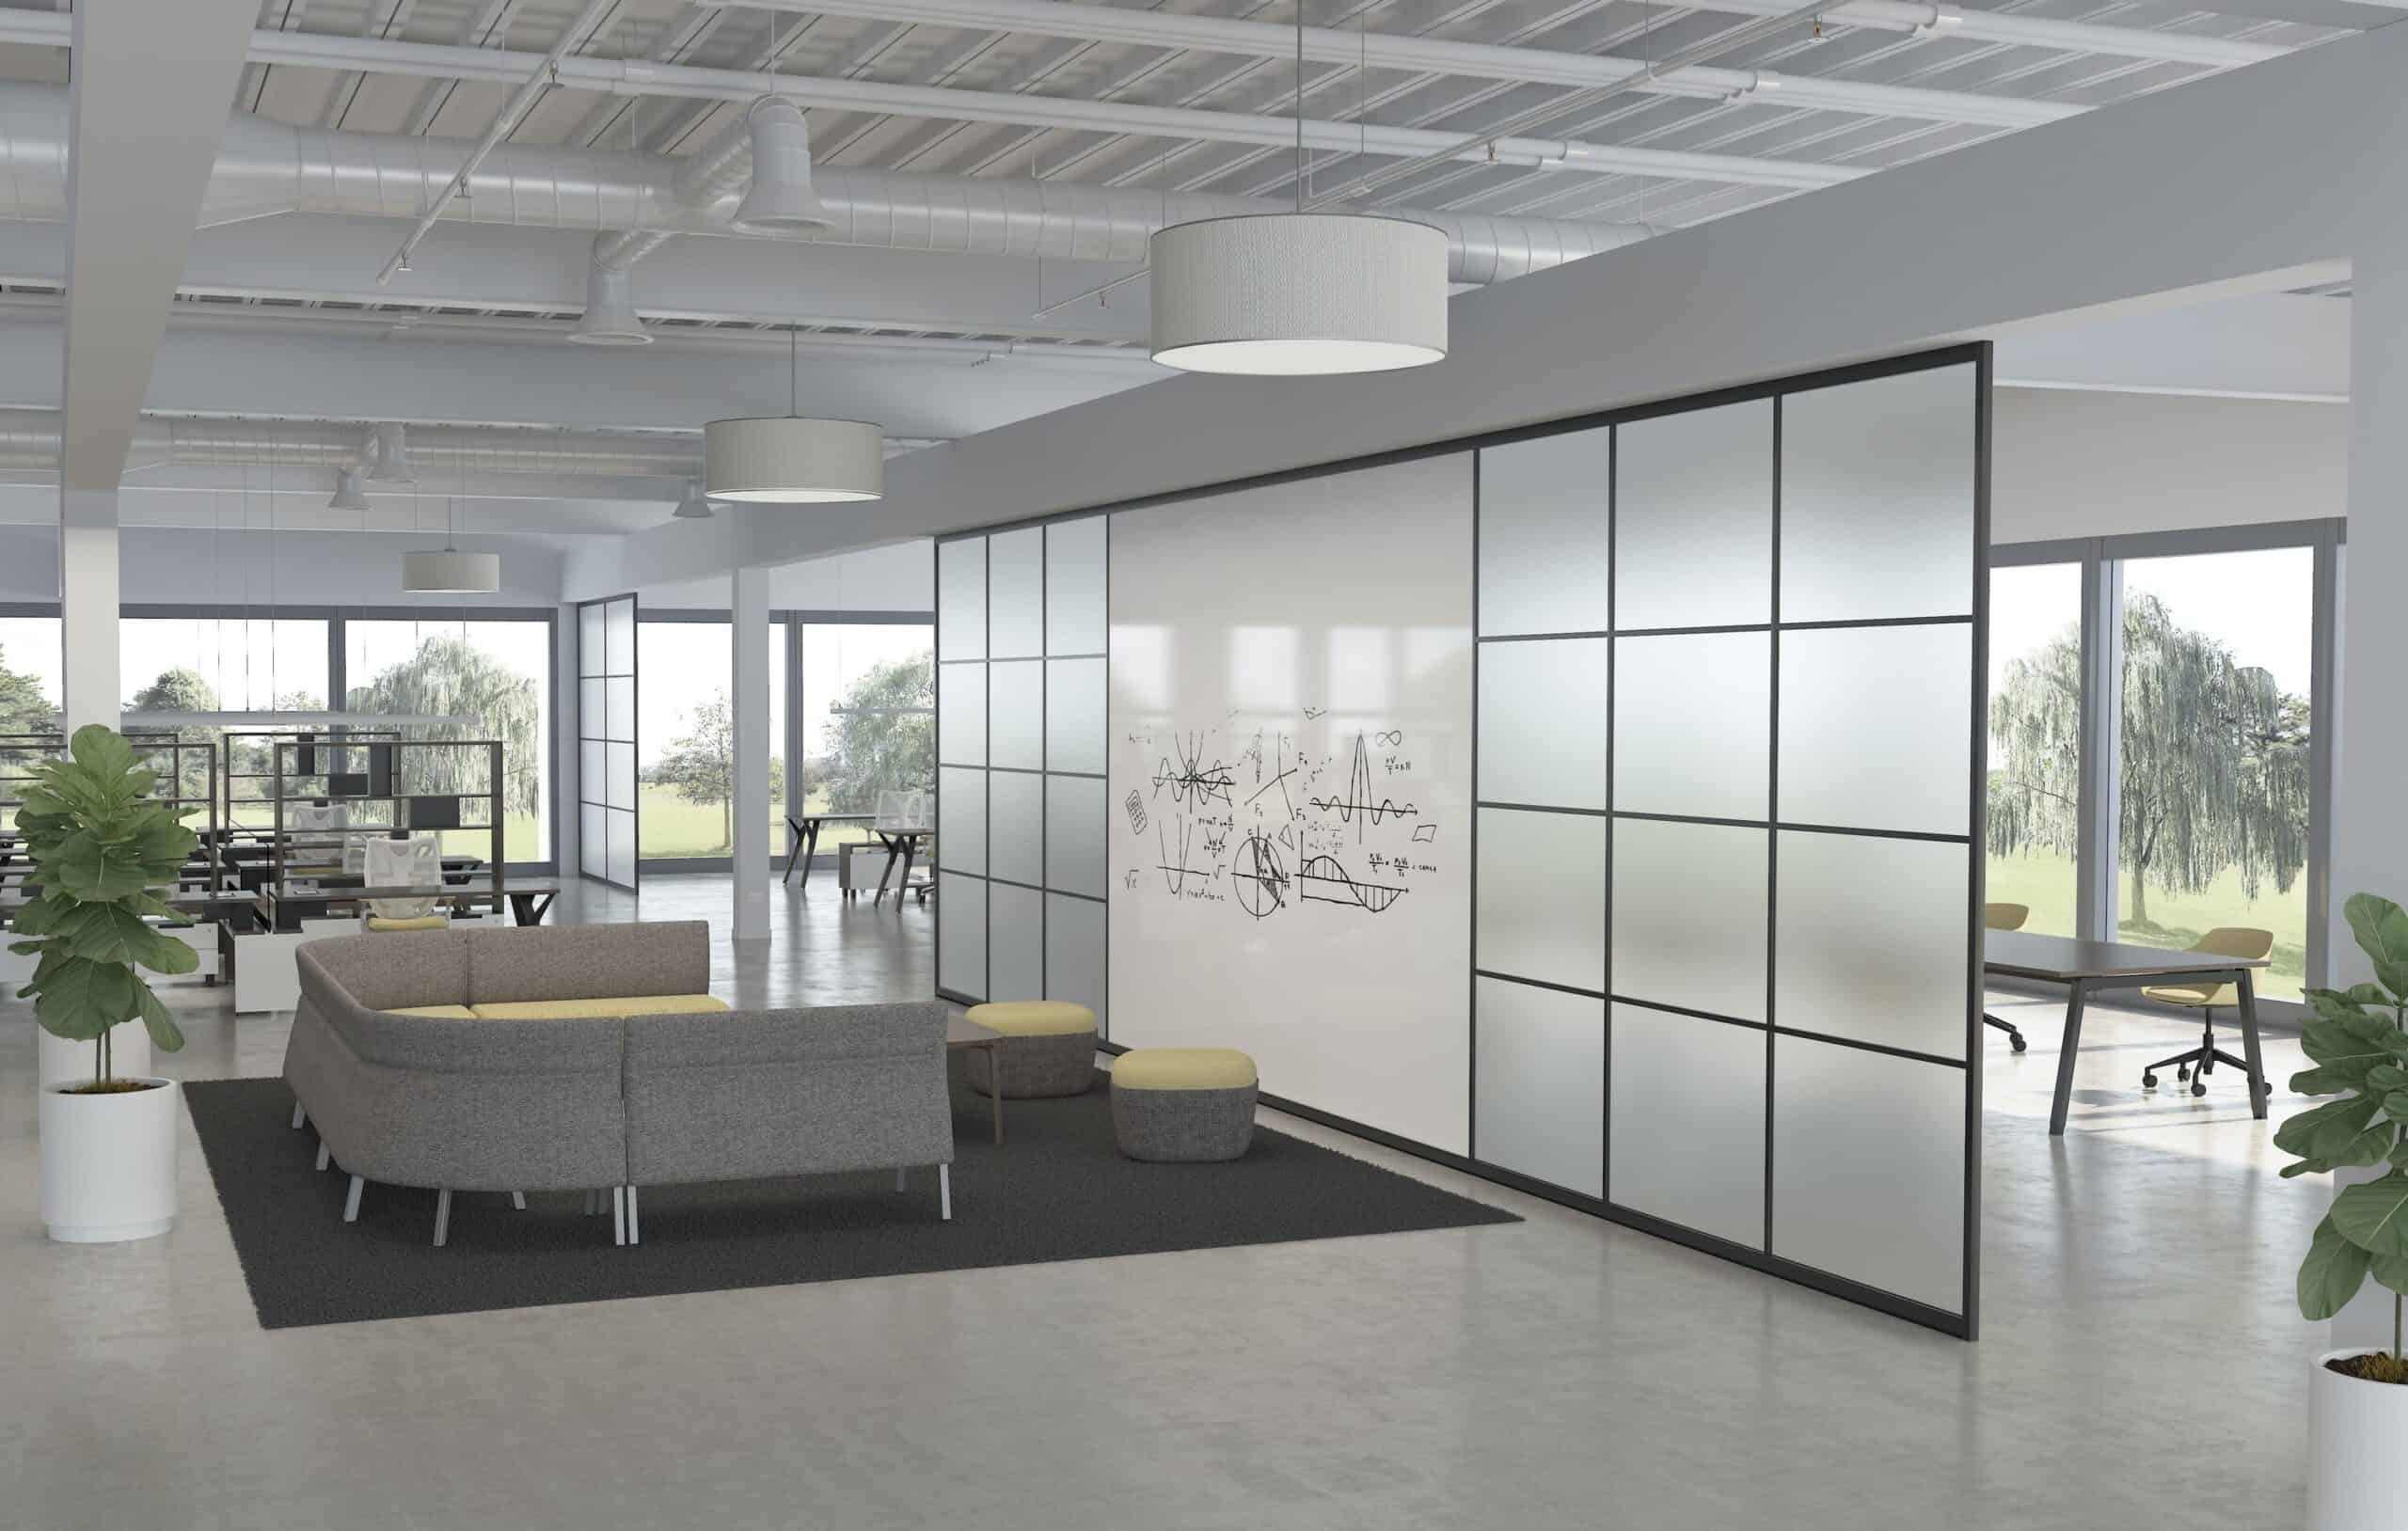 5 Advantages of Modular Office Furniture Systems